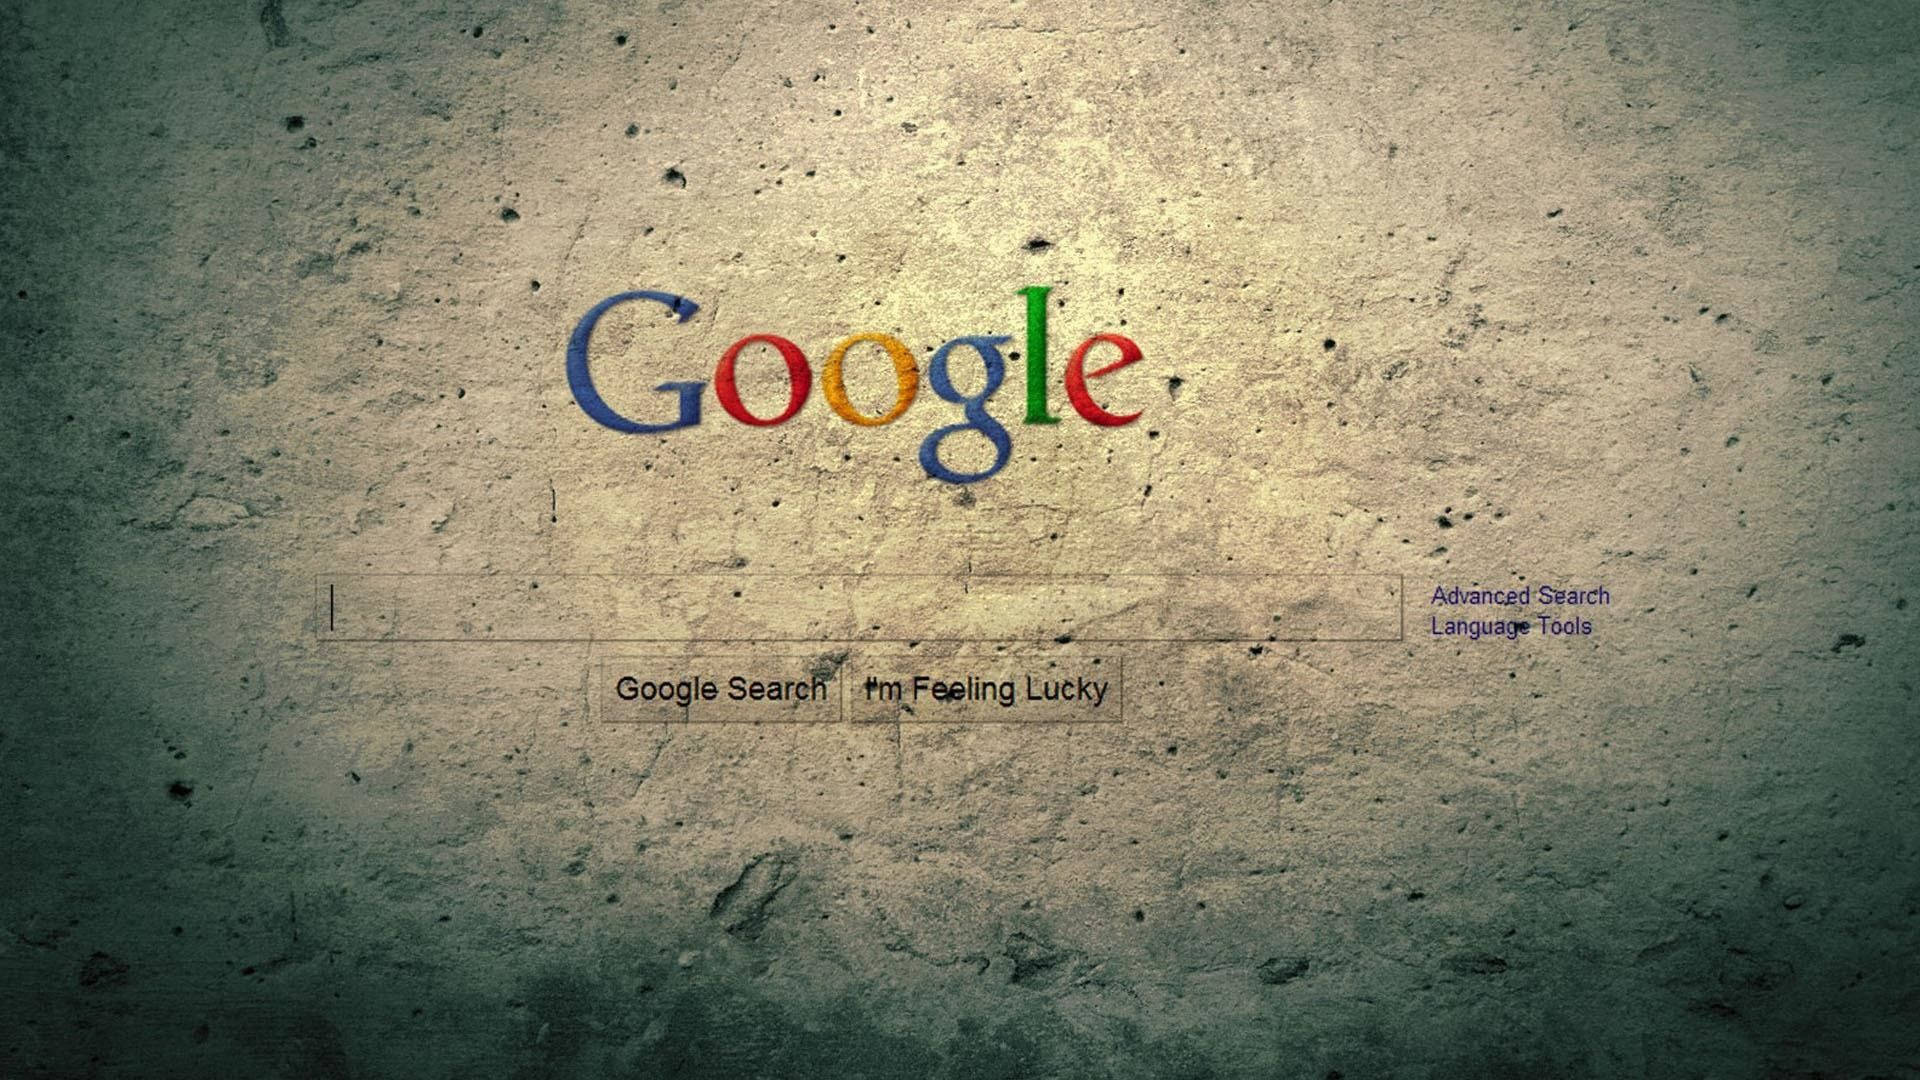 Google 1920X1080 Wallpaper and Background Image